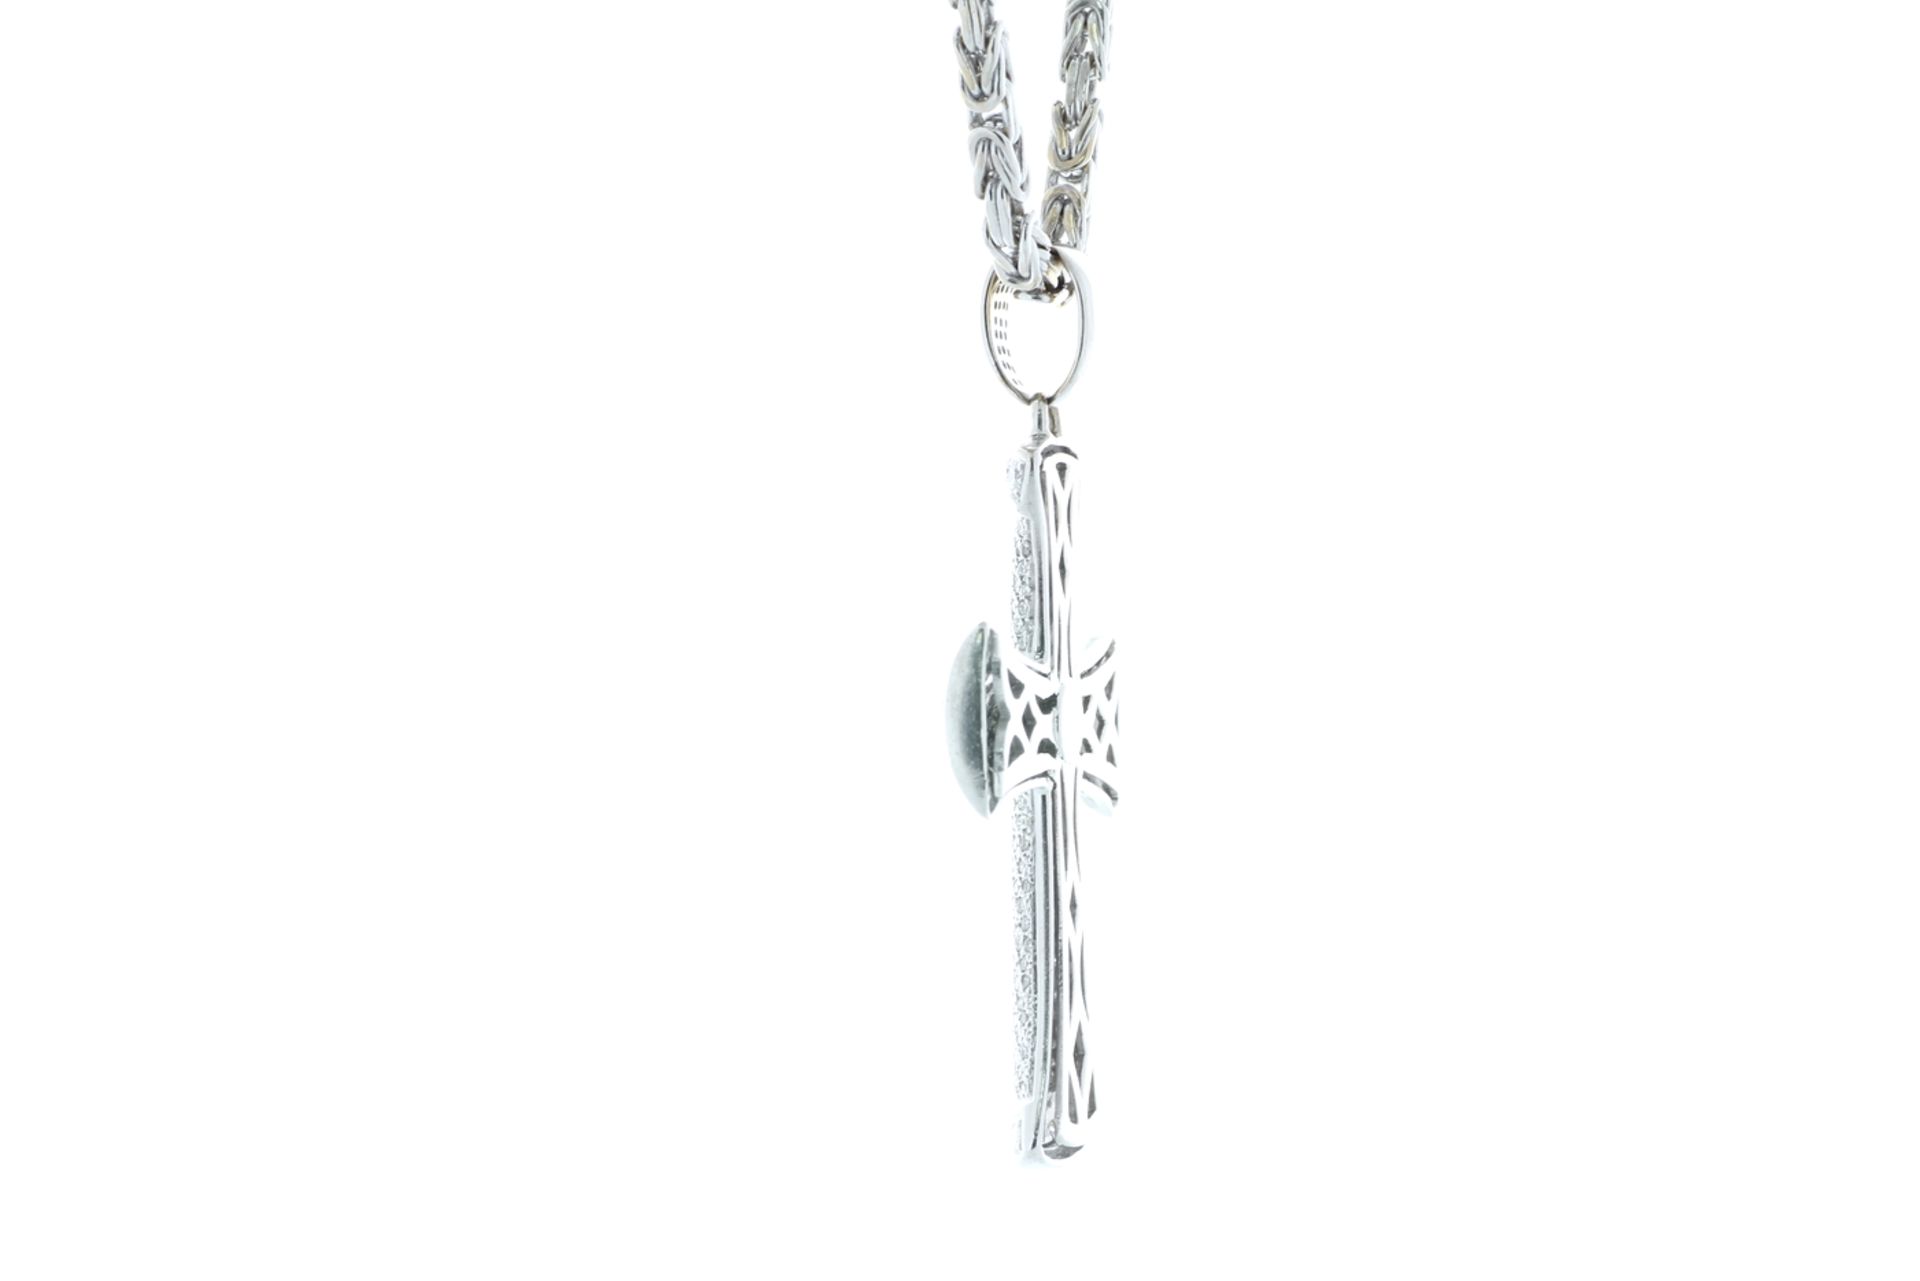 18ct White Gold Diamond Cross Pendant and Chain 5.12 Carats - Valued By AGI £78,880.00 - A beautiful - Image 3 of 5